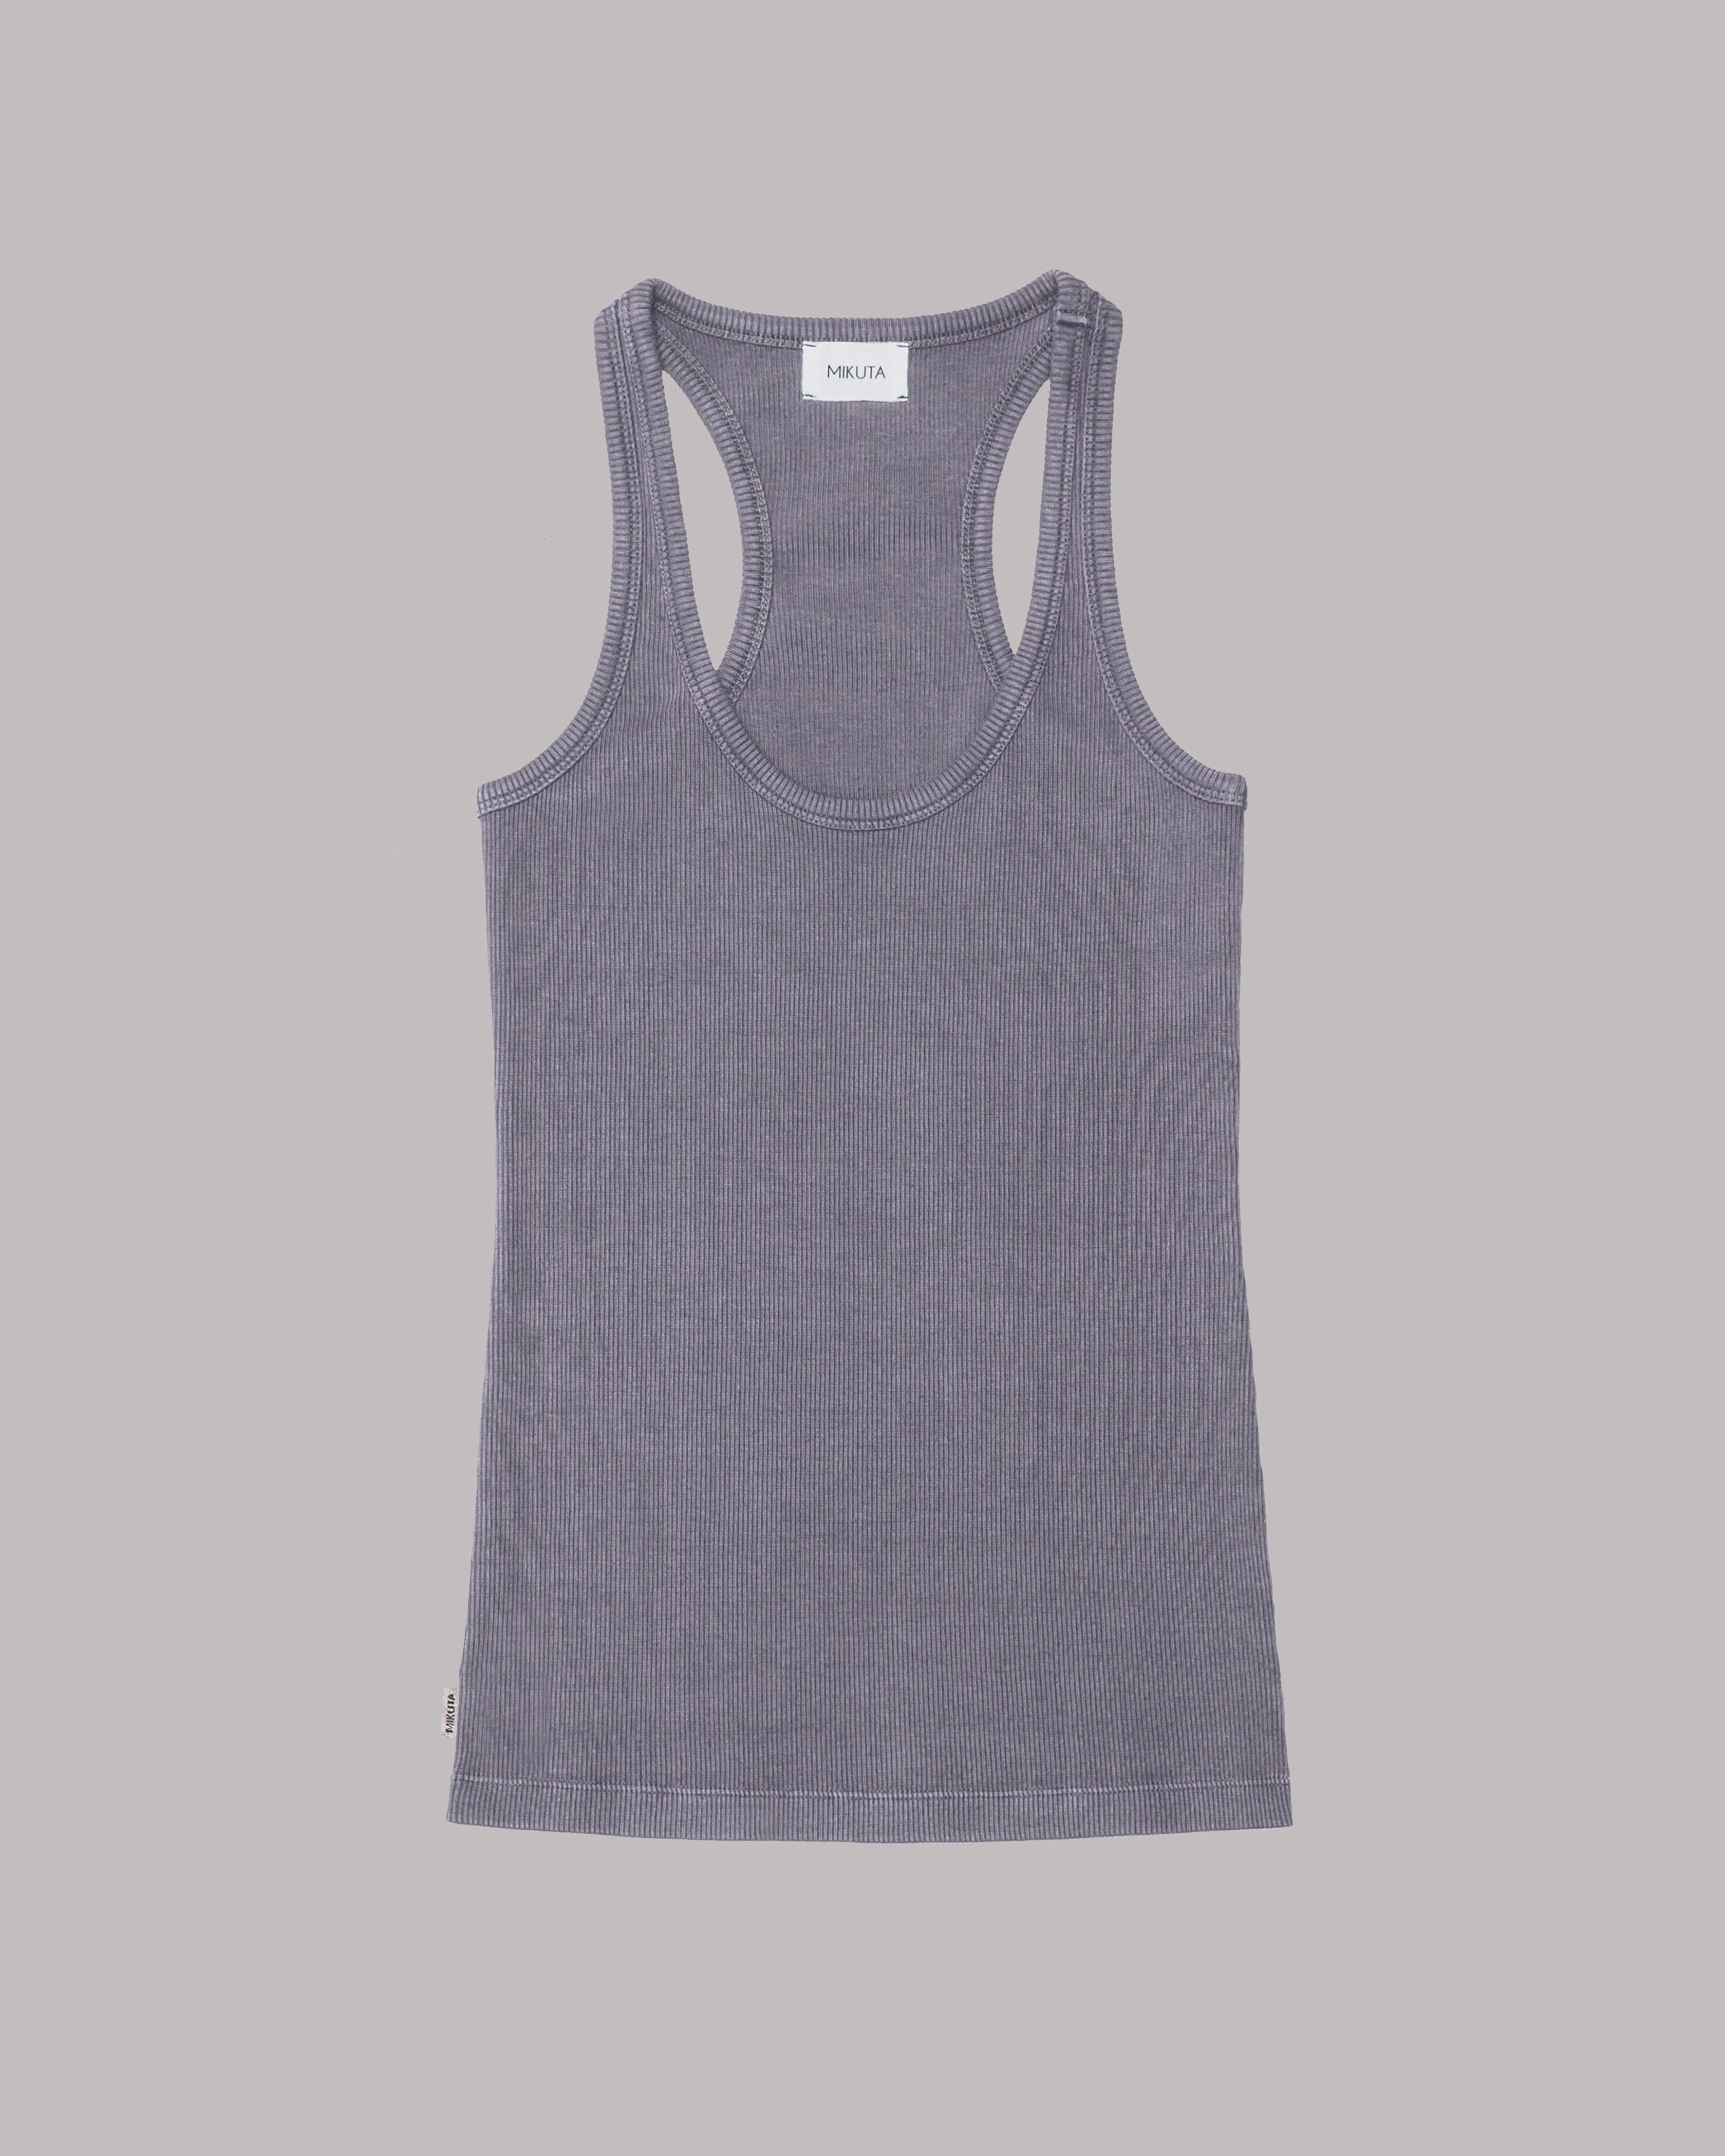 The Purple Ribbed Tank Top